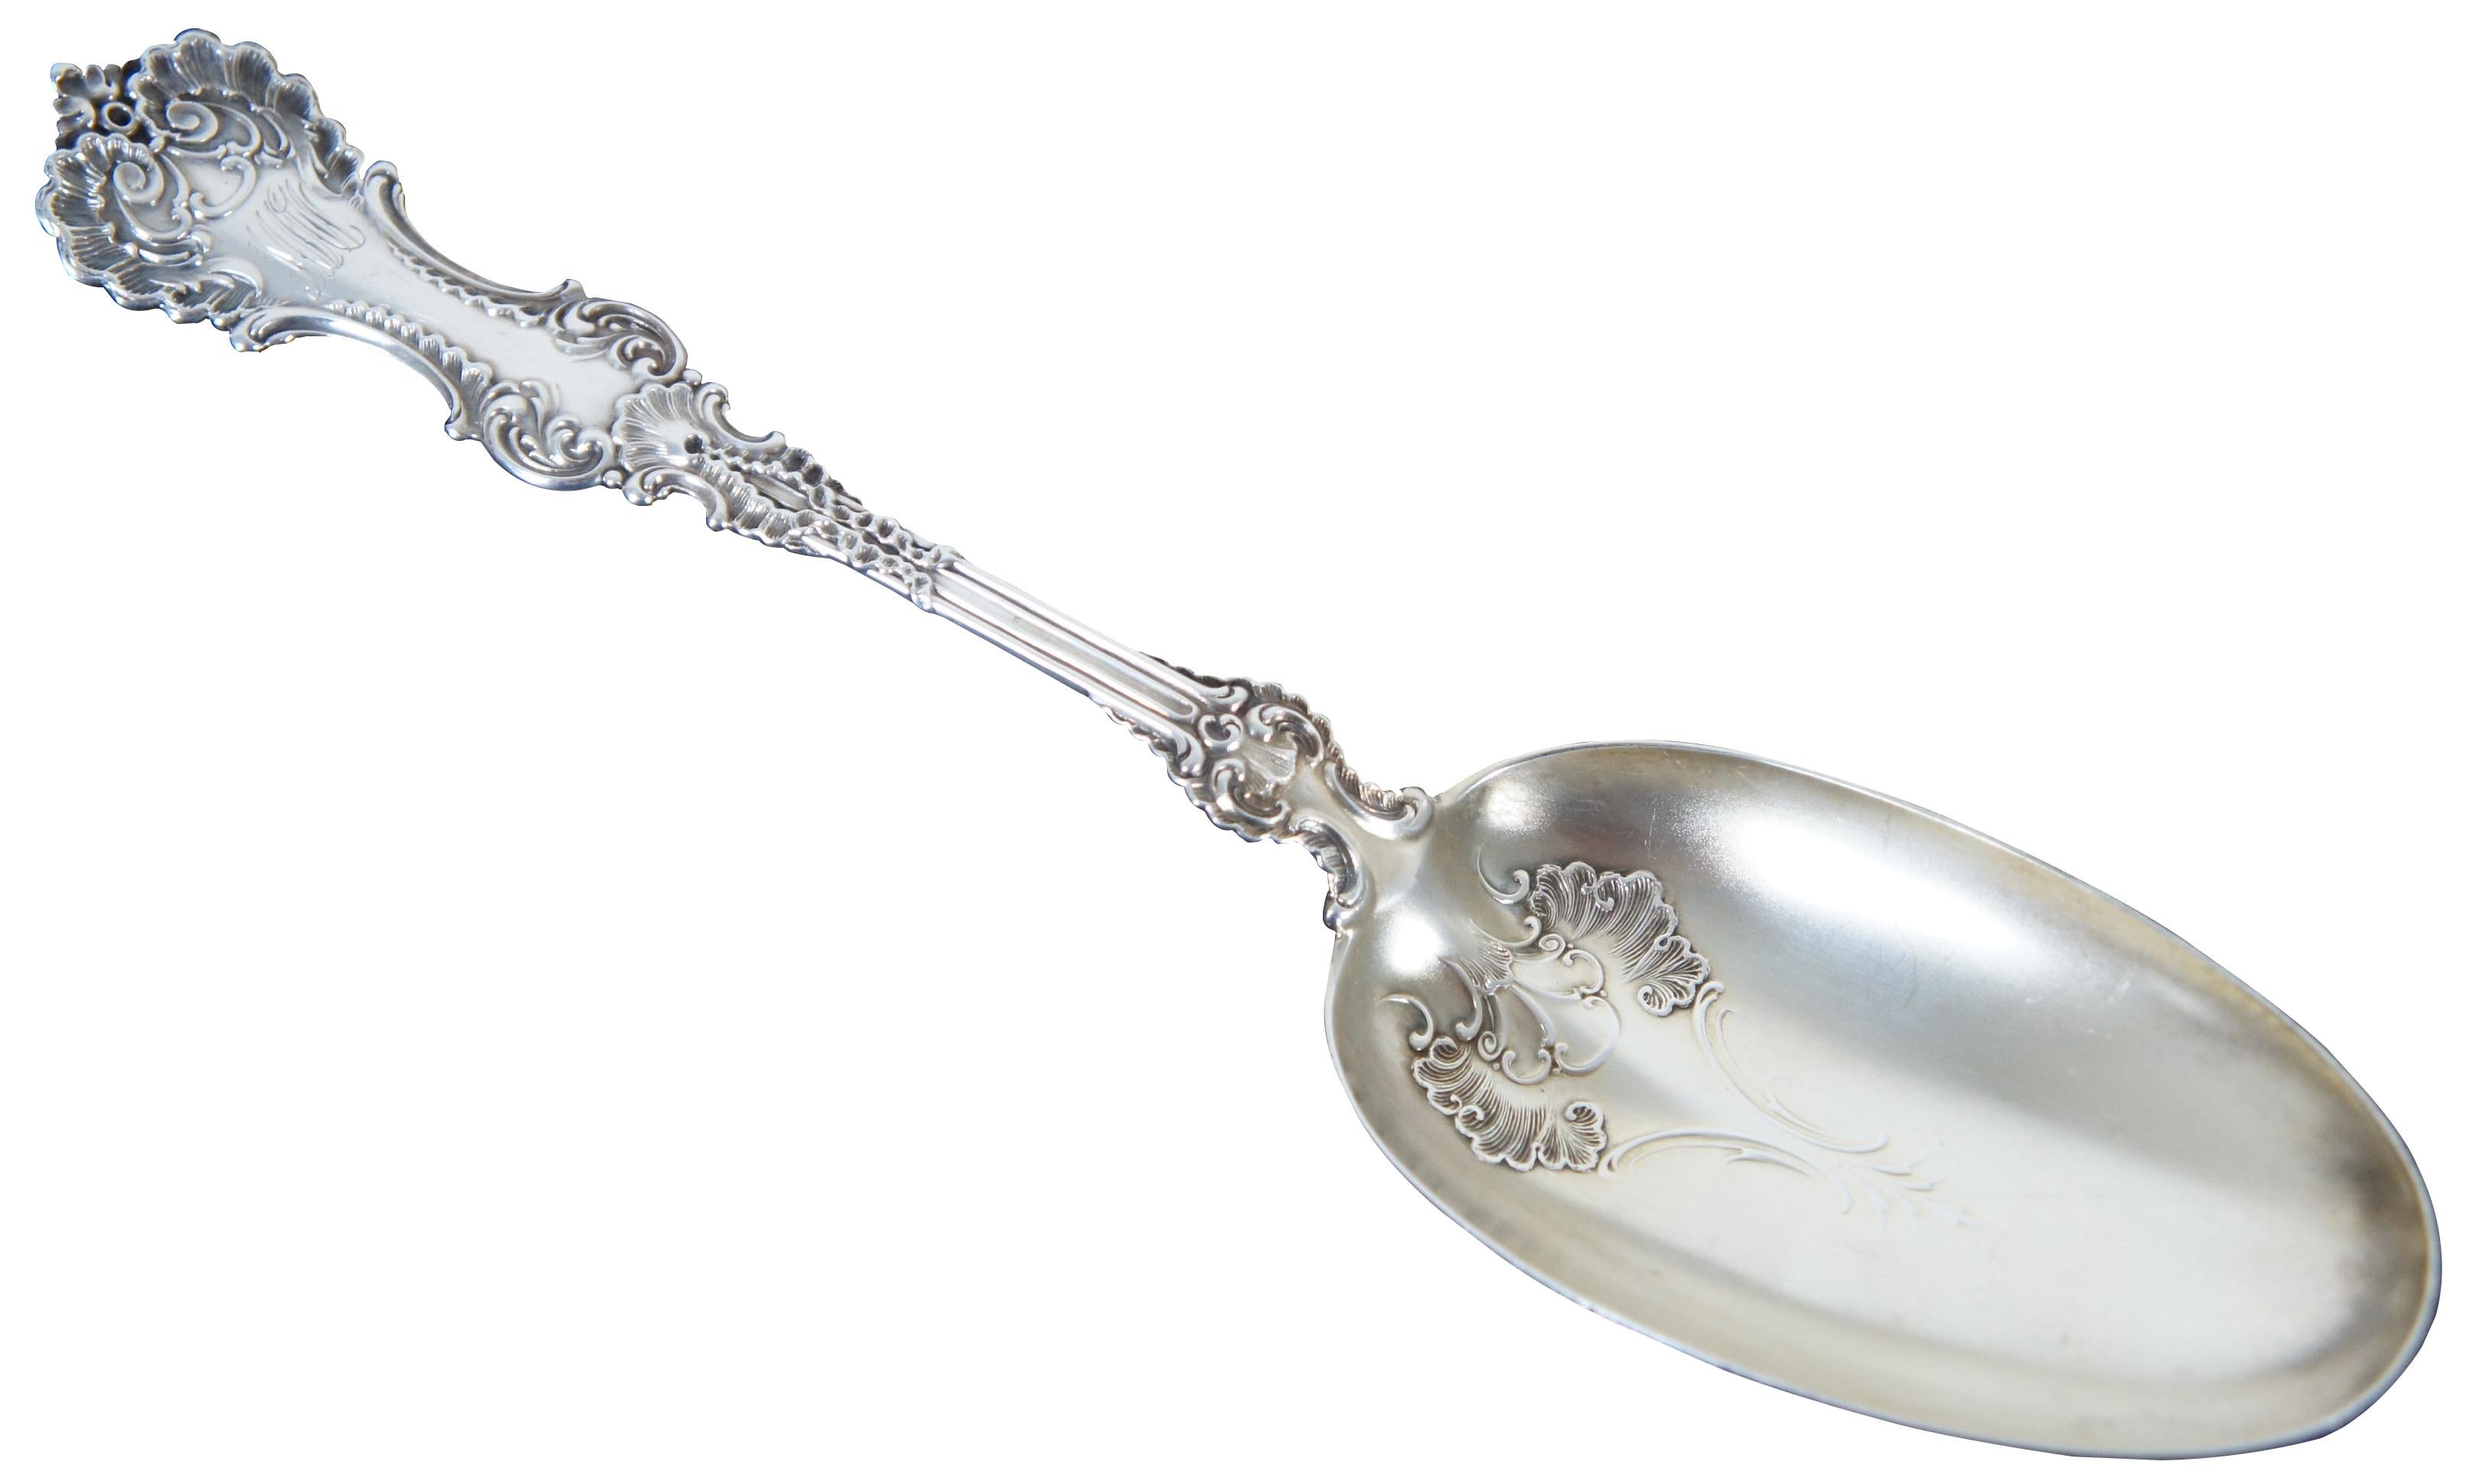 Antique Whiting Manufacturing Company sterling silver serving spoon in the 1895/1898 Pompadour pattern designed by Charles Osborne and monogrammed. Measures: 9